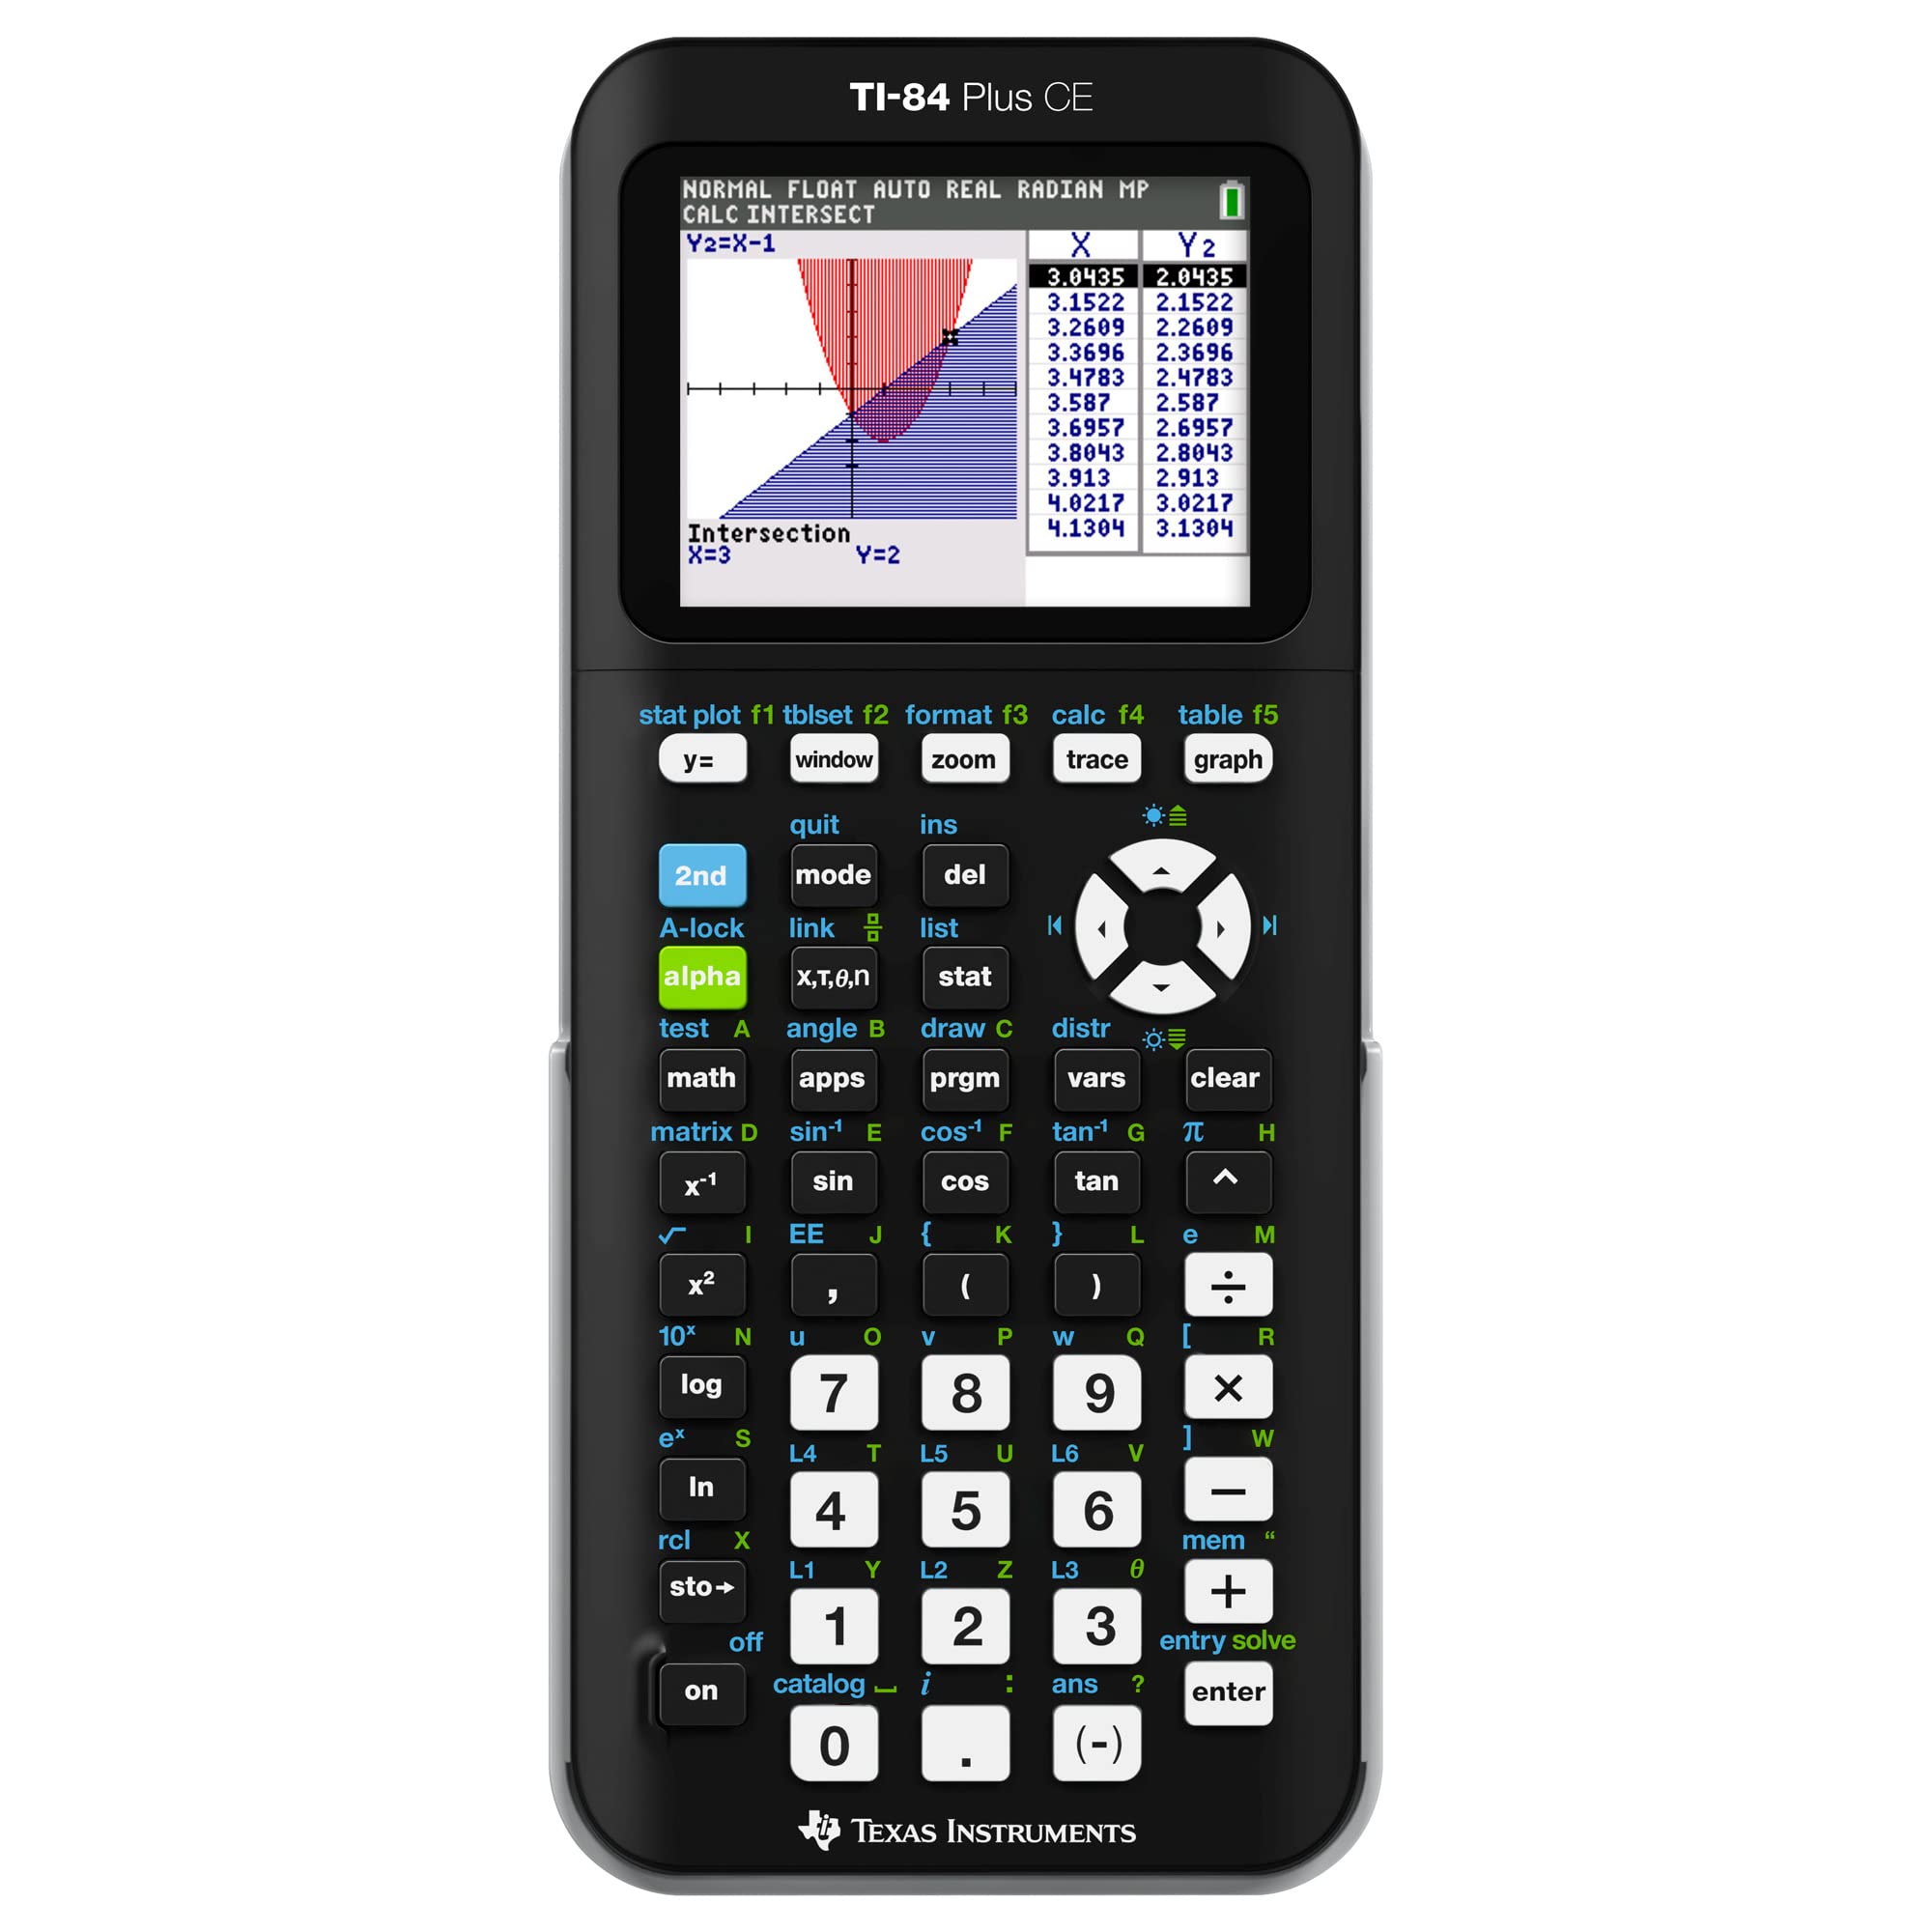 $98.87: Texas Instruments TI-84 Plus CE Color Graphing Calculator, Black 7.5 Inch at Amazon